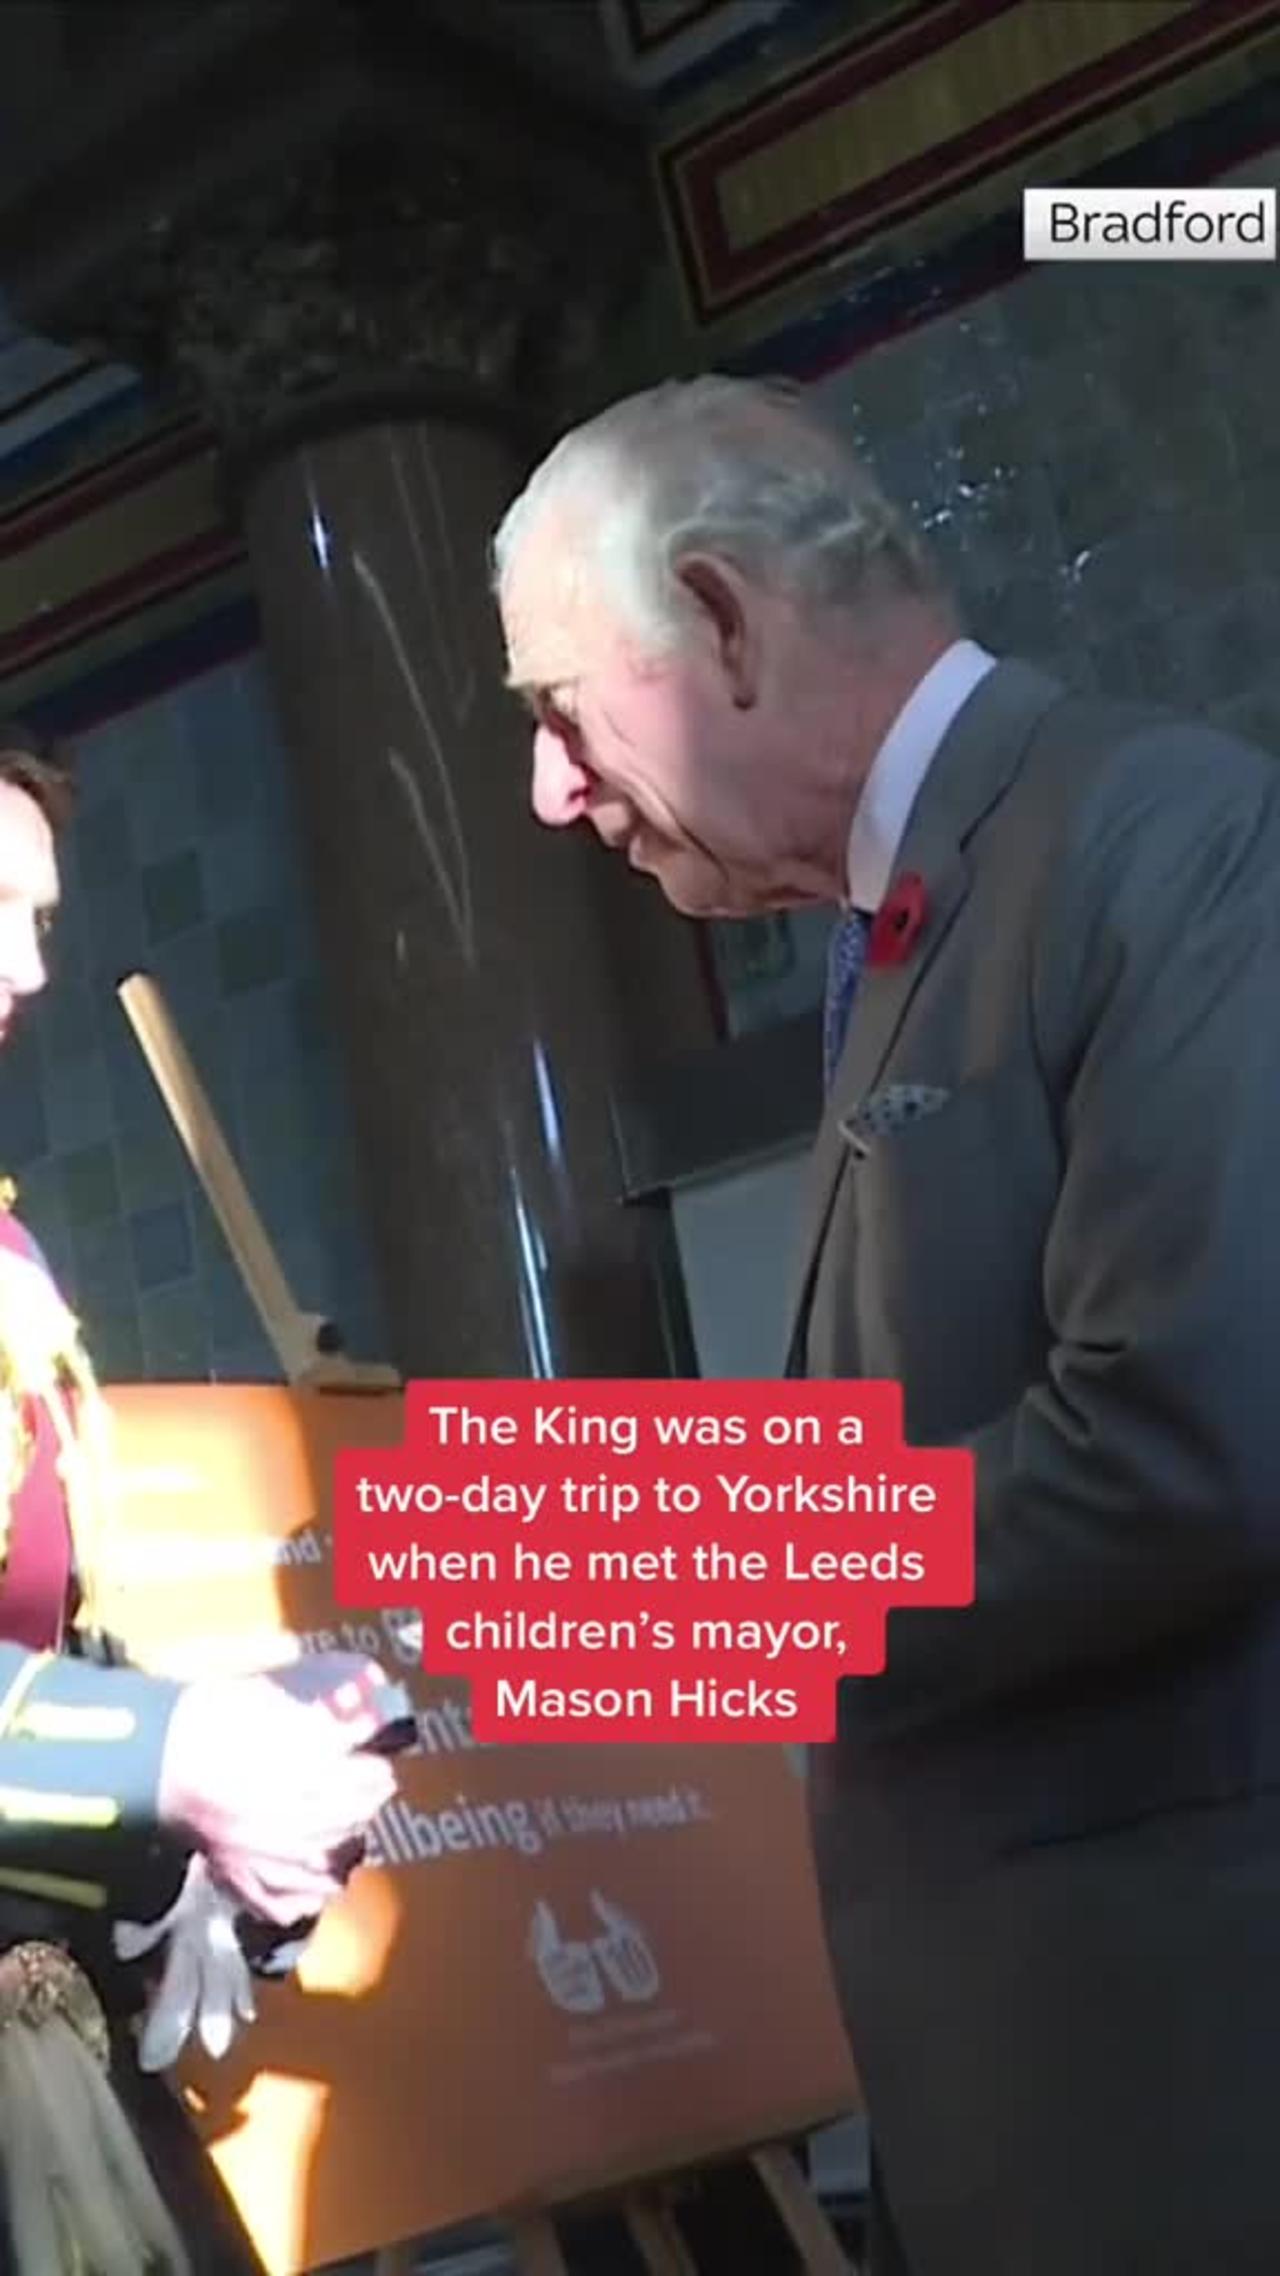 The King was on a two-day trip to Yorkshire when he met the Leedschildren's mayor,Mason Hicks